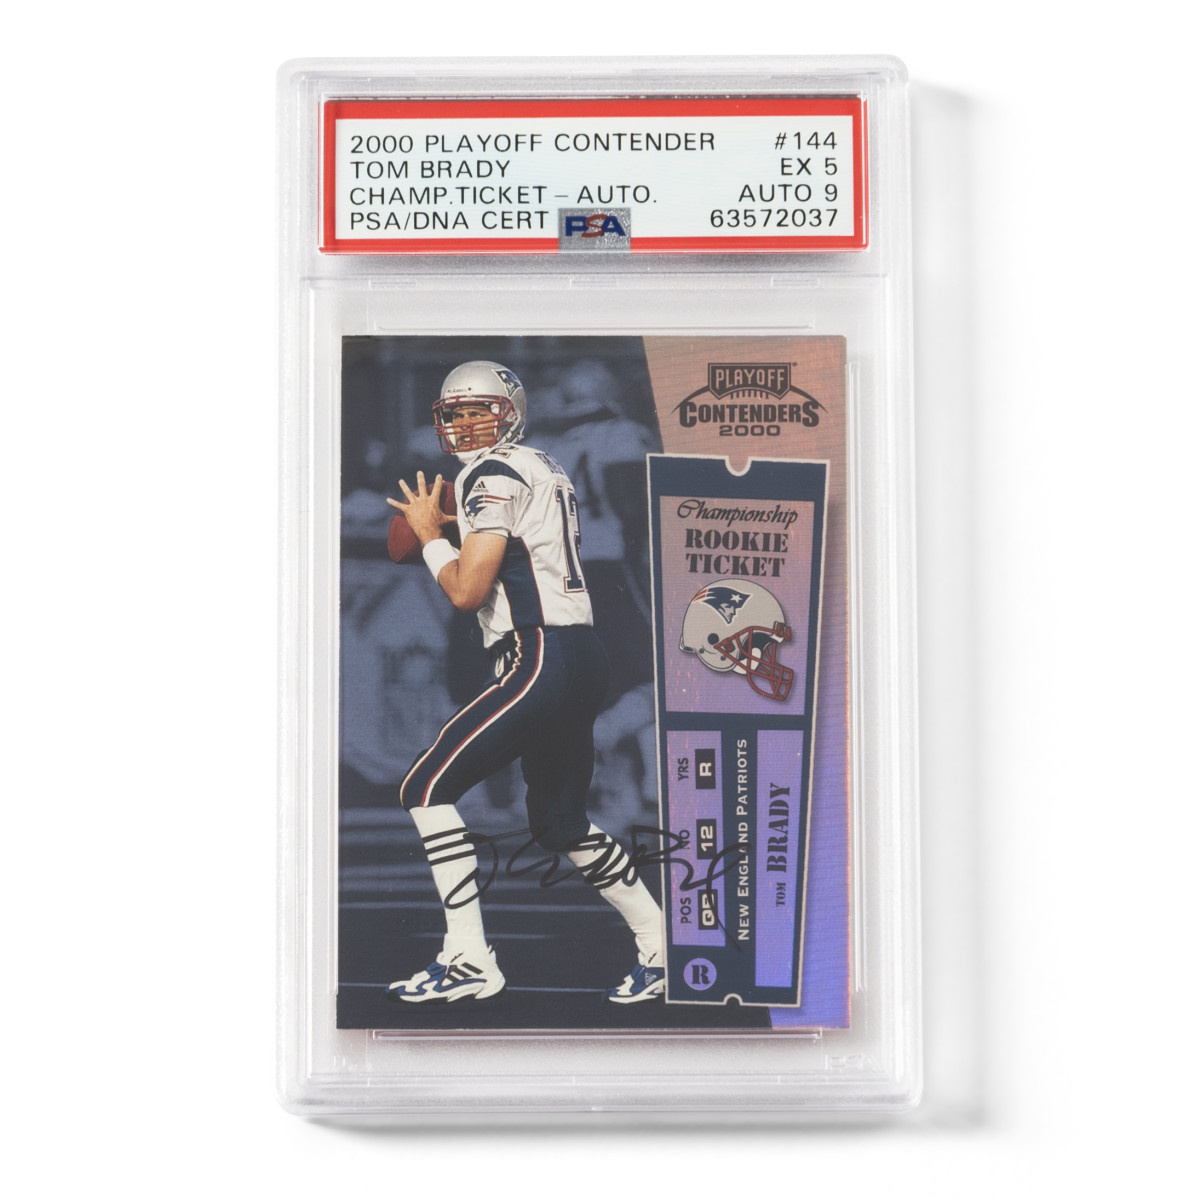 A 2000 Playoff Contenders Tom Brady Championship Ticket Auto card at Skinner Auctioneers.